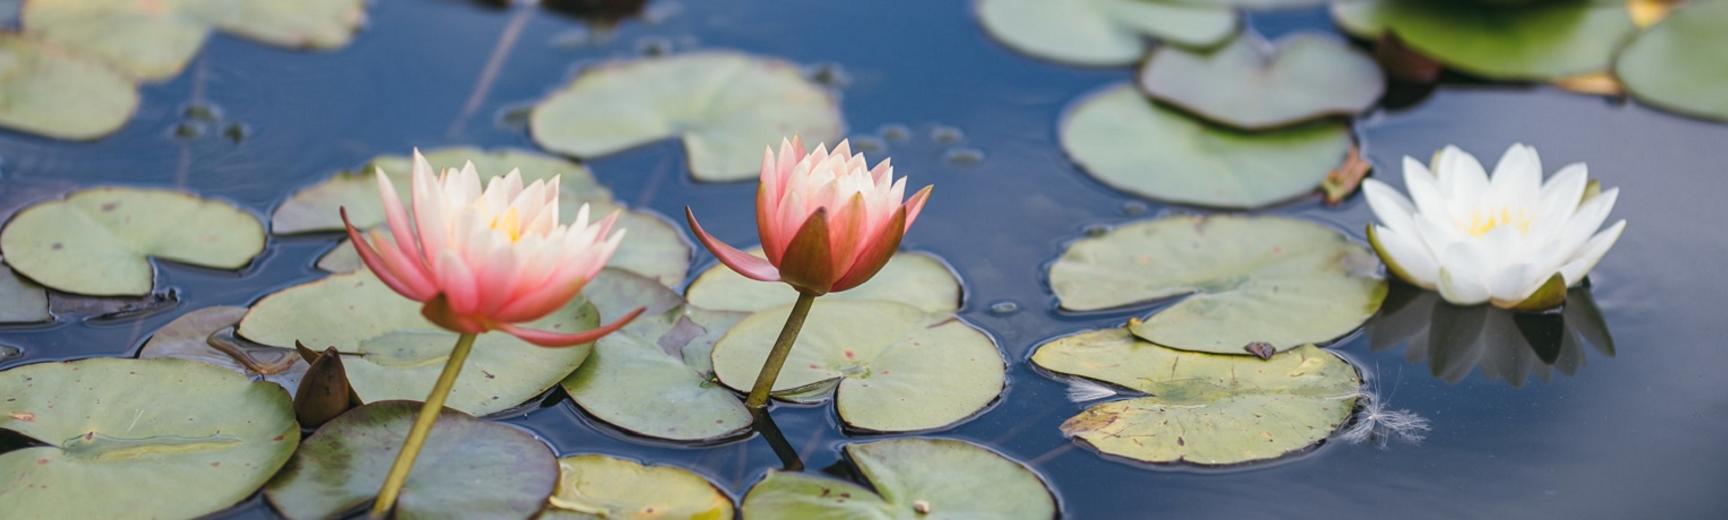 Photograph of waterlilies